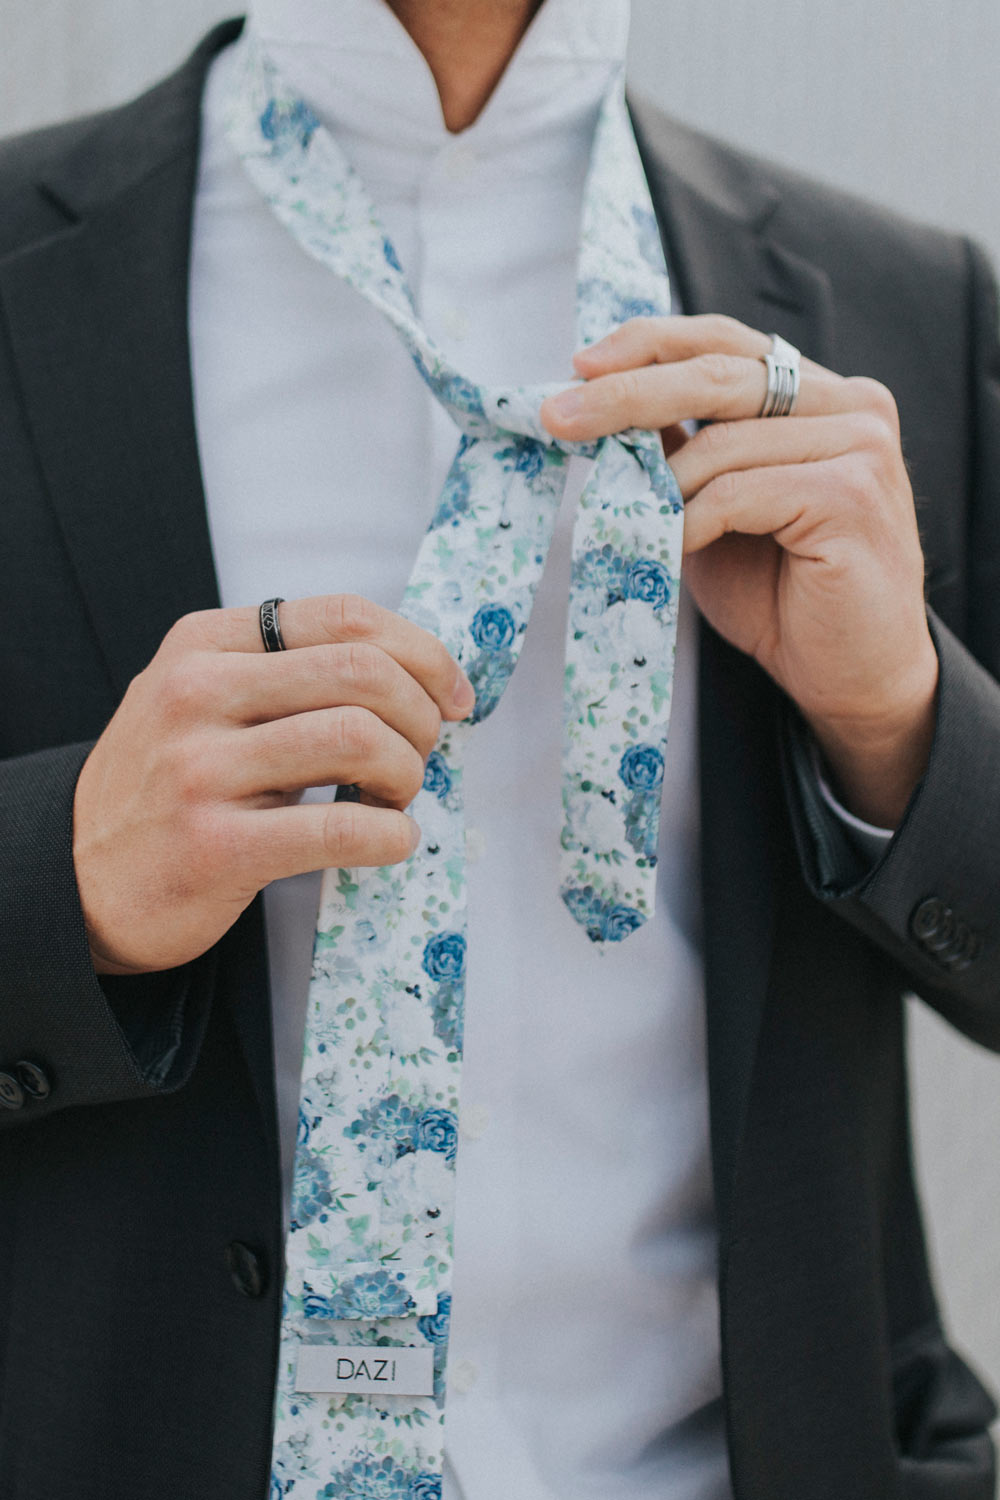 Arctic Ice tie worn with a white shirt and black suit jacket.